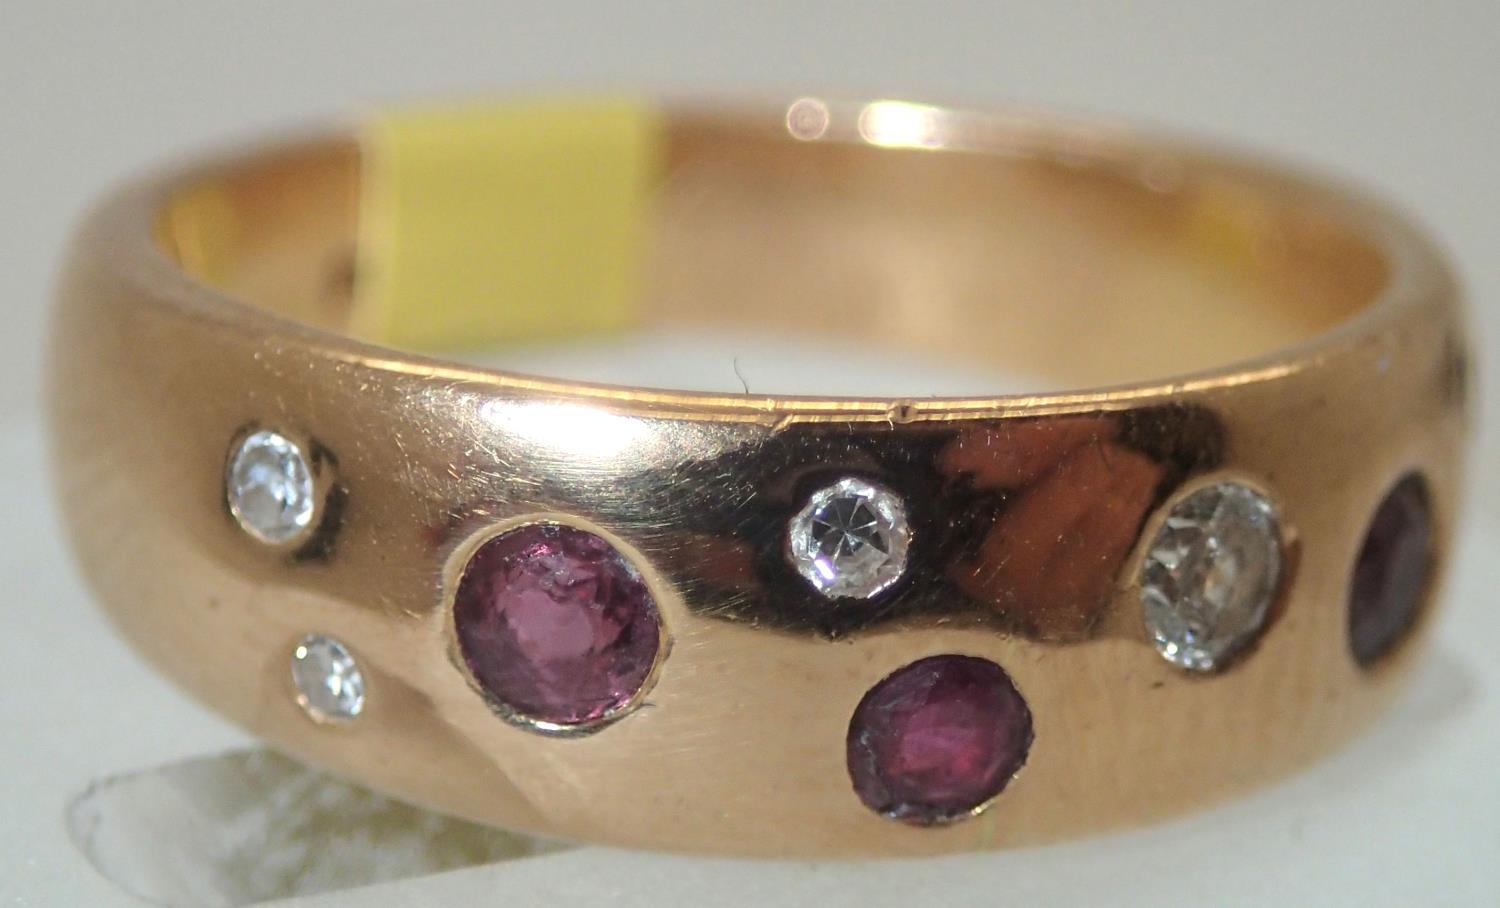 Vintage 18ct gold, ruby and diamond heavy set ring 7.5g (rubover setting) size O. P&P group 1 (£16